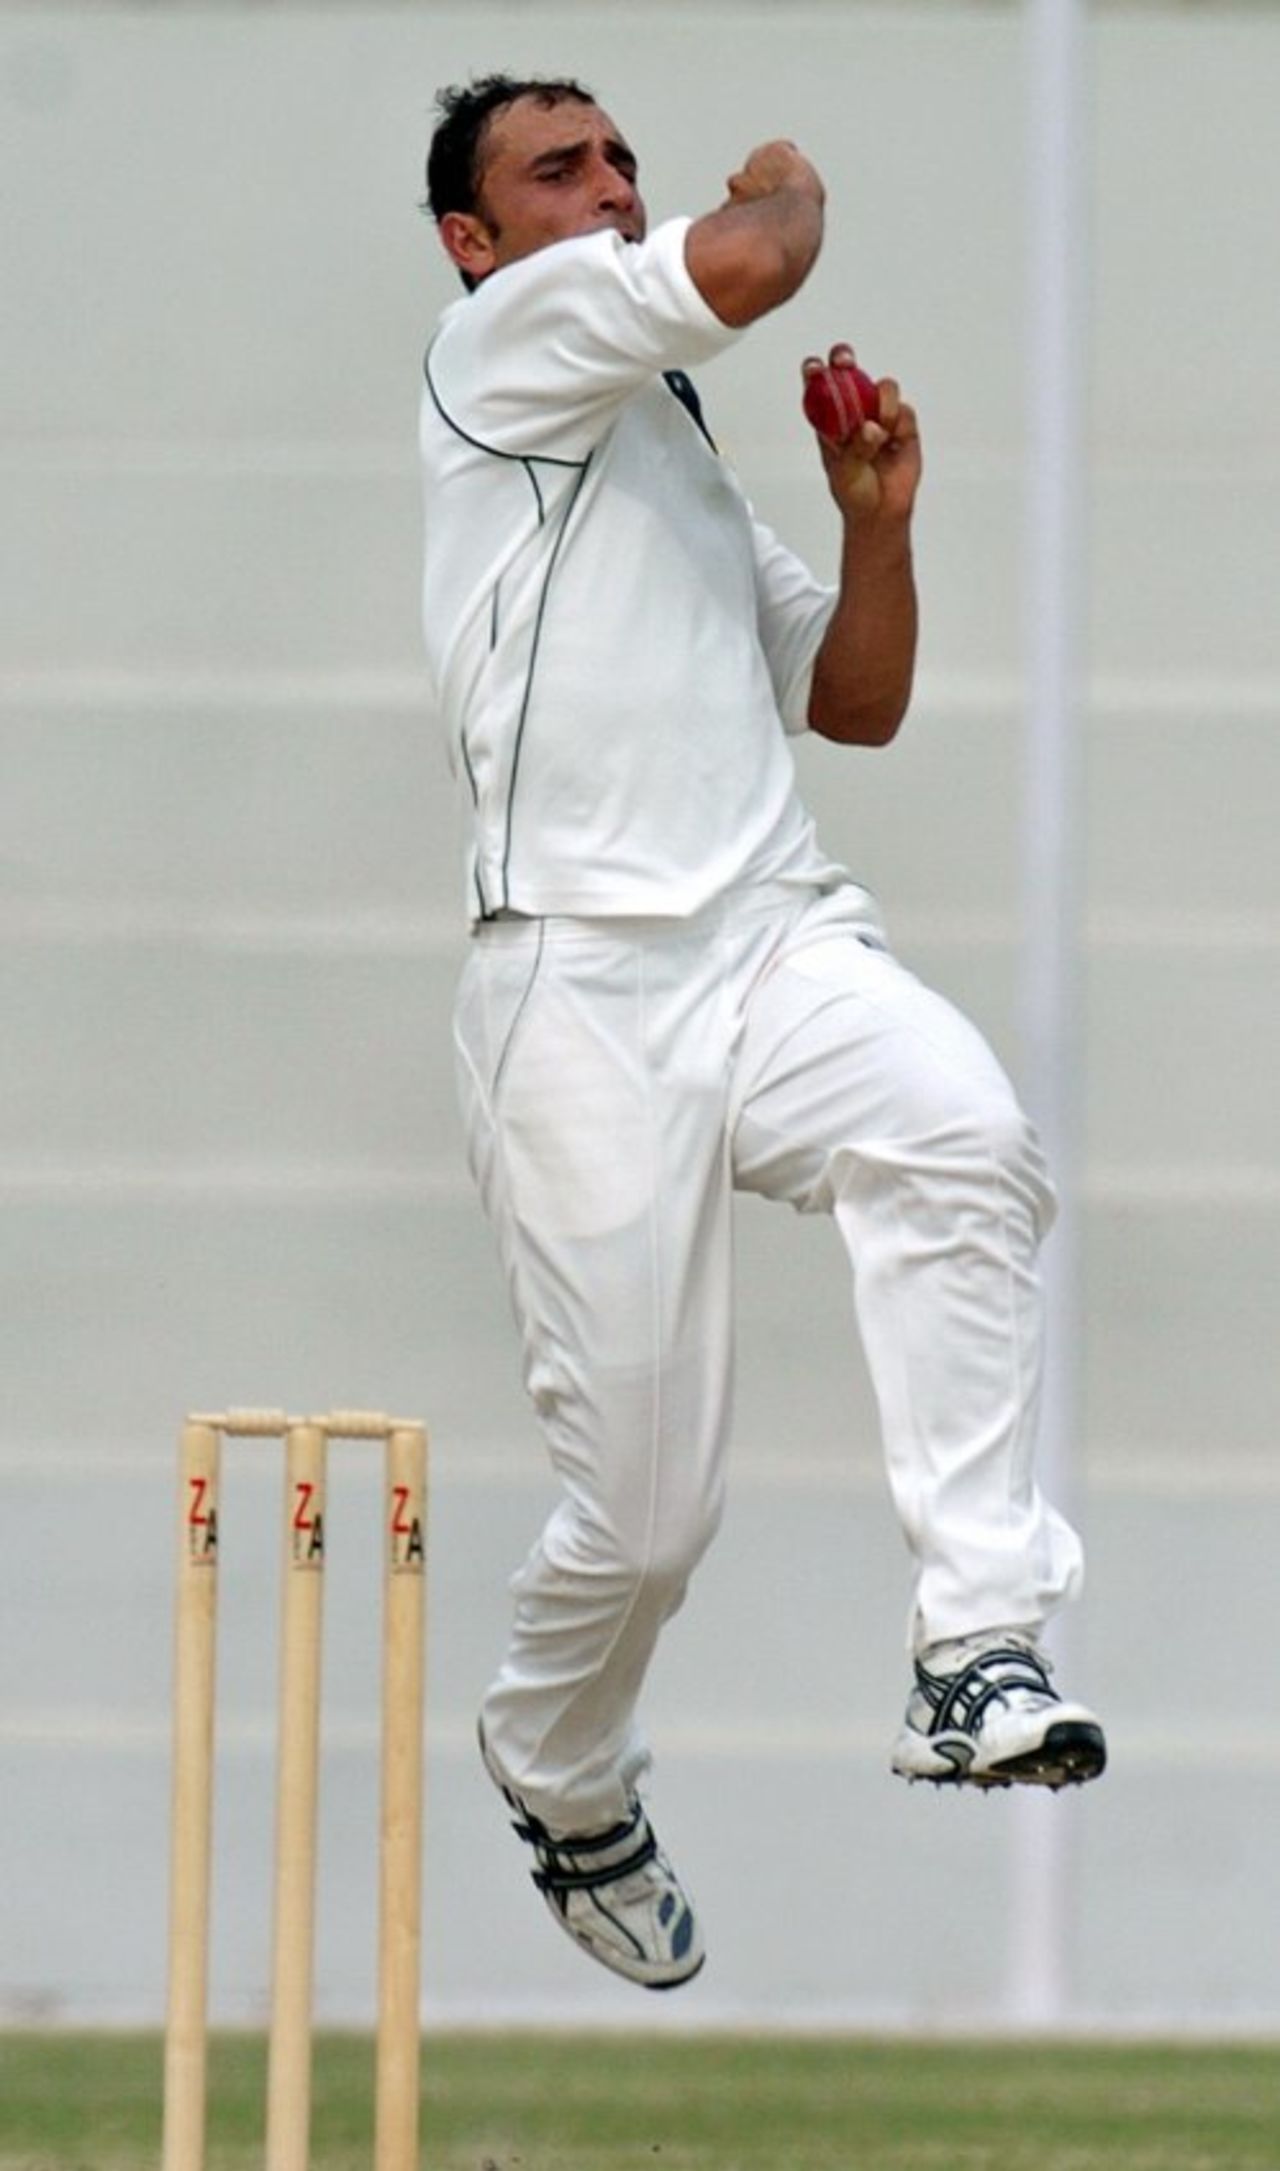 Samiullah Khan in his delivery stride, Patron's XI v Zimbabweans, Karachi, 3rd day, January 16, 2008
